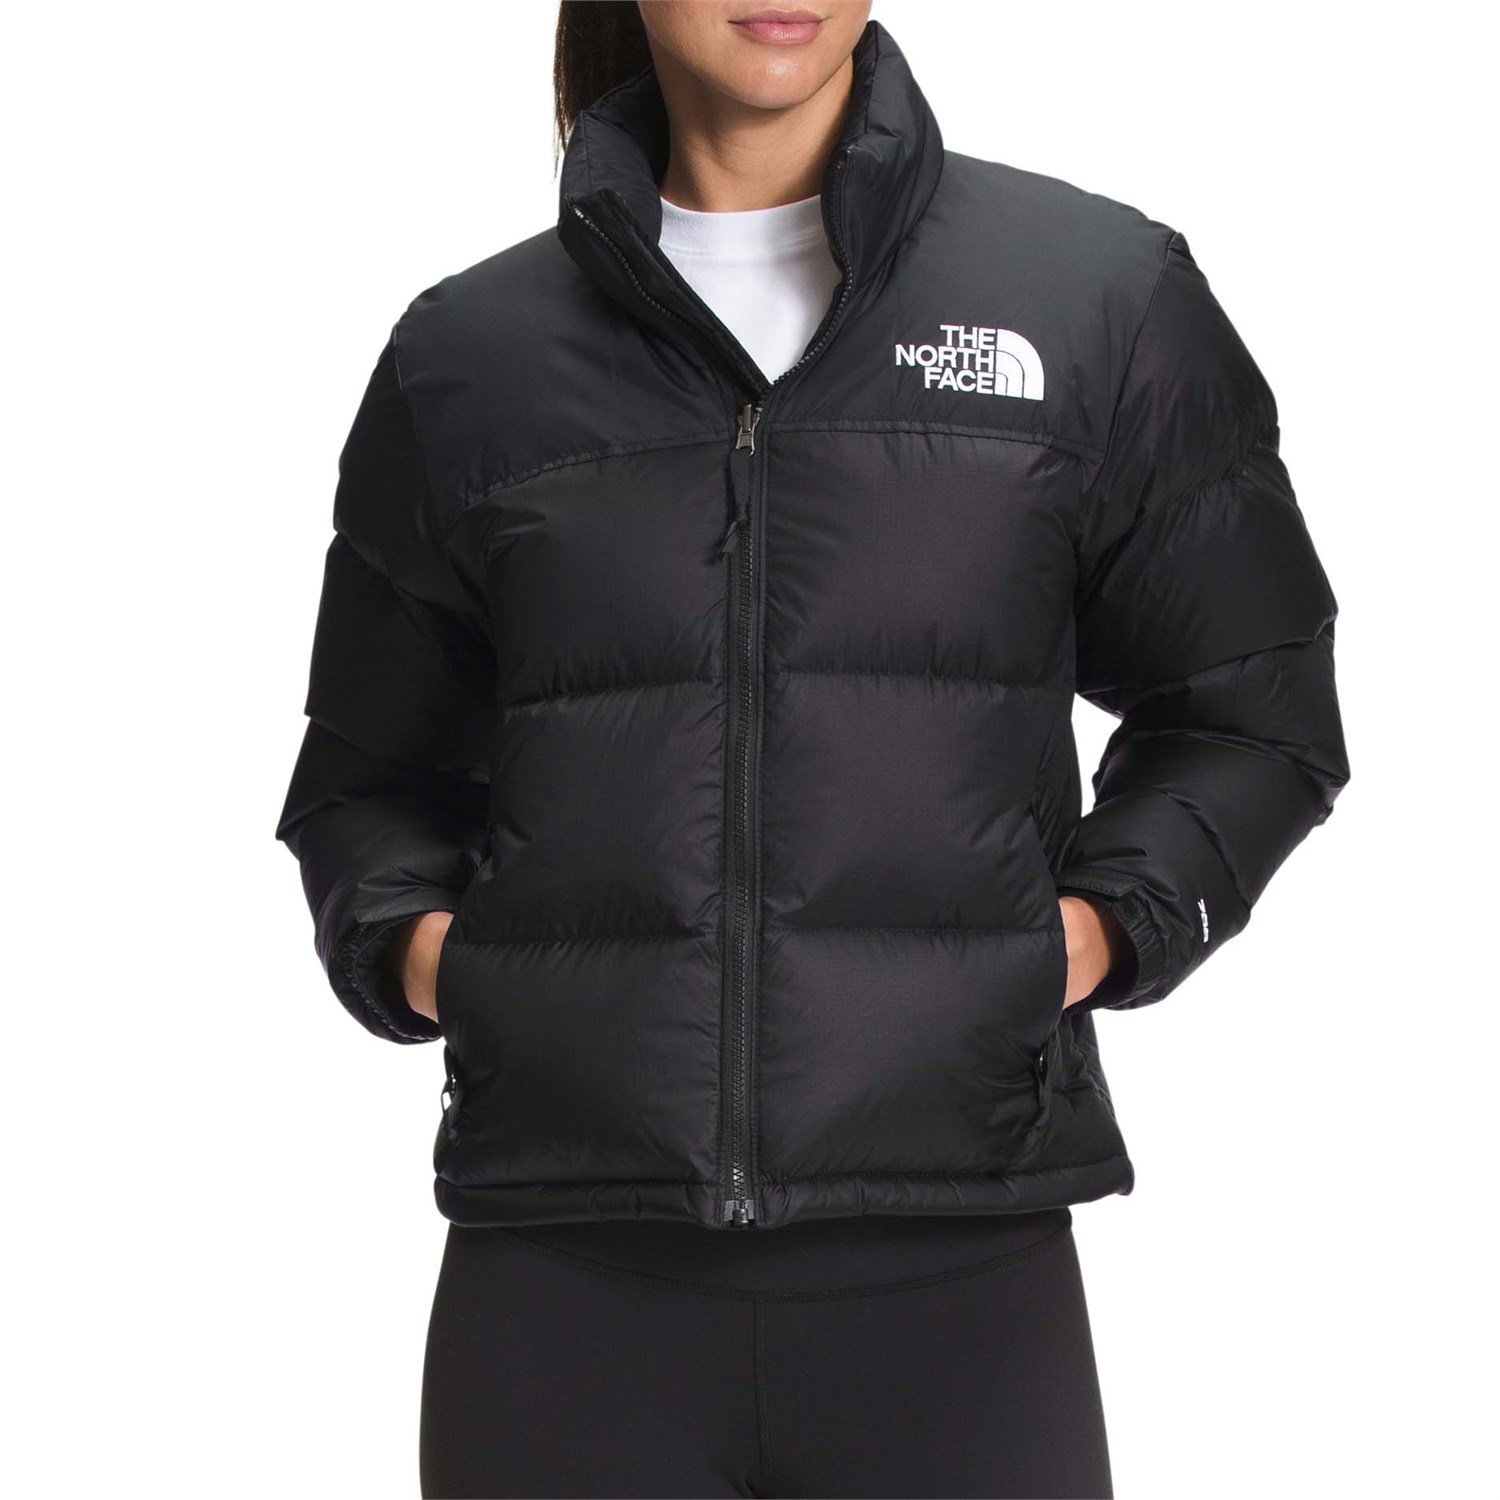 The North Face Womens Jacket - Gray - Medium NWOT | North face jacket womens,  North face women, Jackets for women